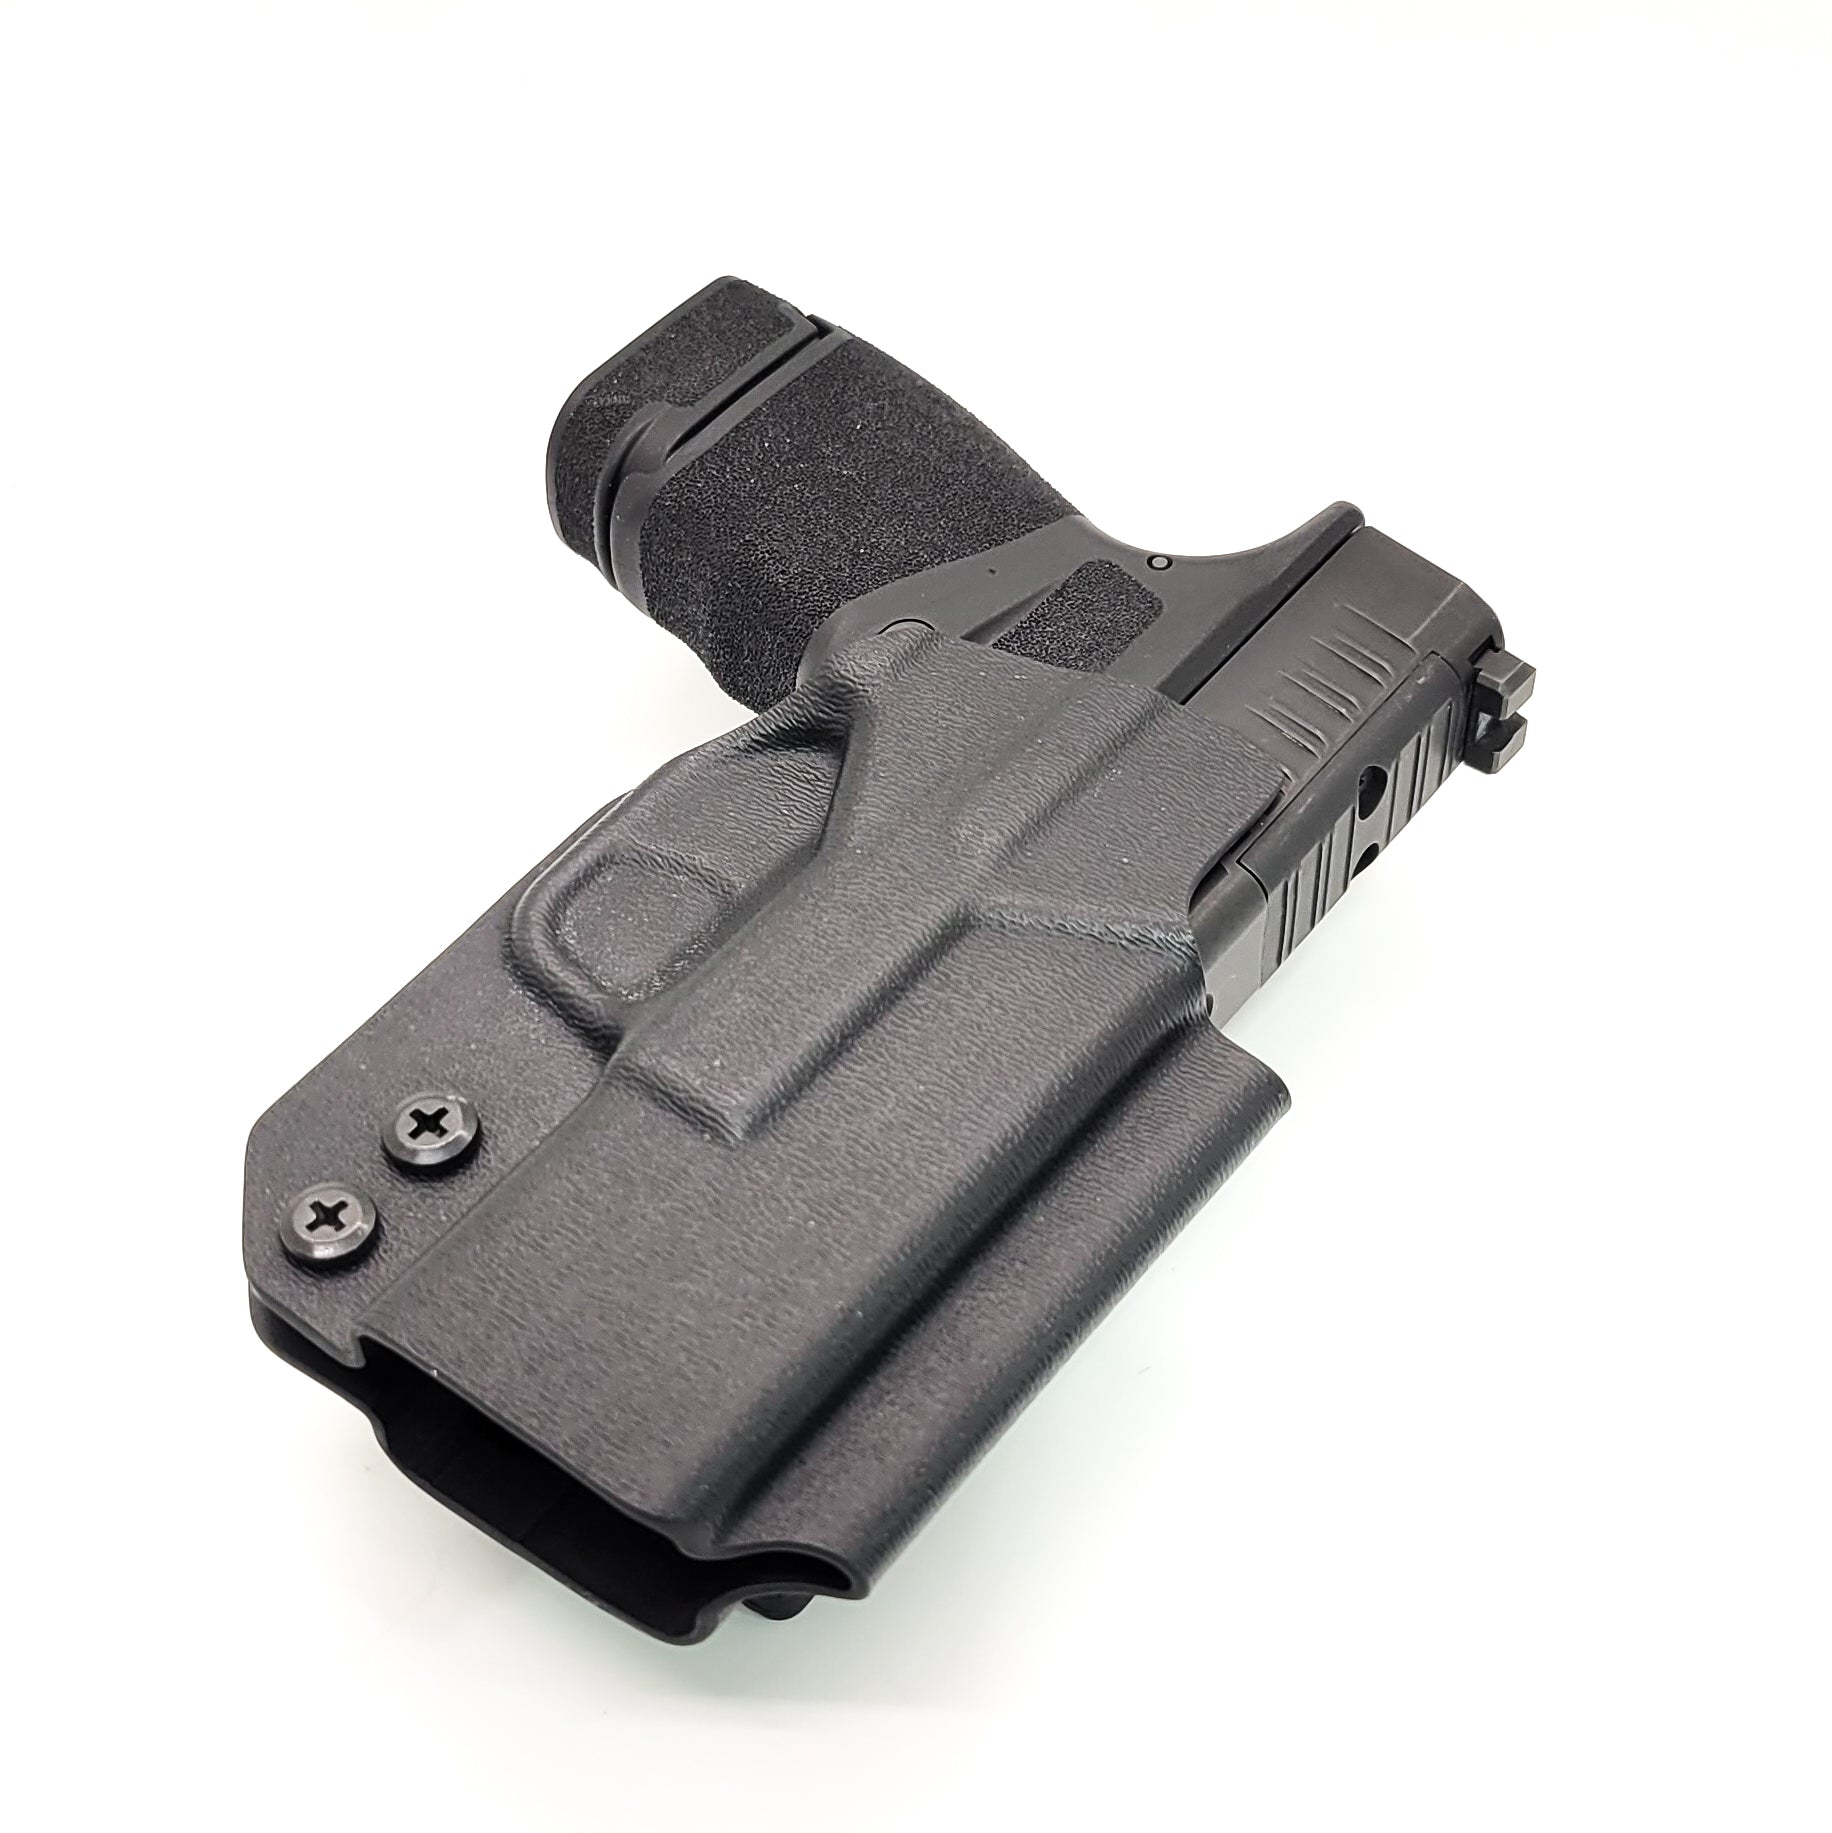 For the best OWB Outside Waistband Holster designed to fit the Springfield Armory Hellcat, shop Four Brothers Holters. Cleared for a red dot sight mounted to the pistol. Full sweat guard, adjustable retention, minimal material, and smooth edges to reduce printing. Proudly made in the USA.